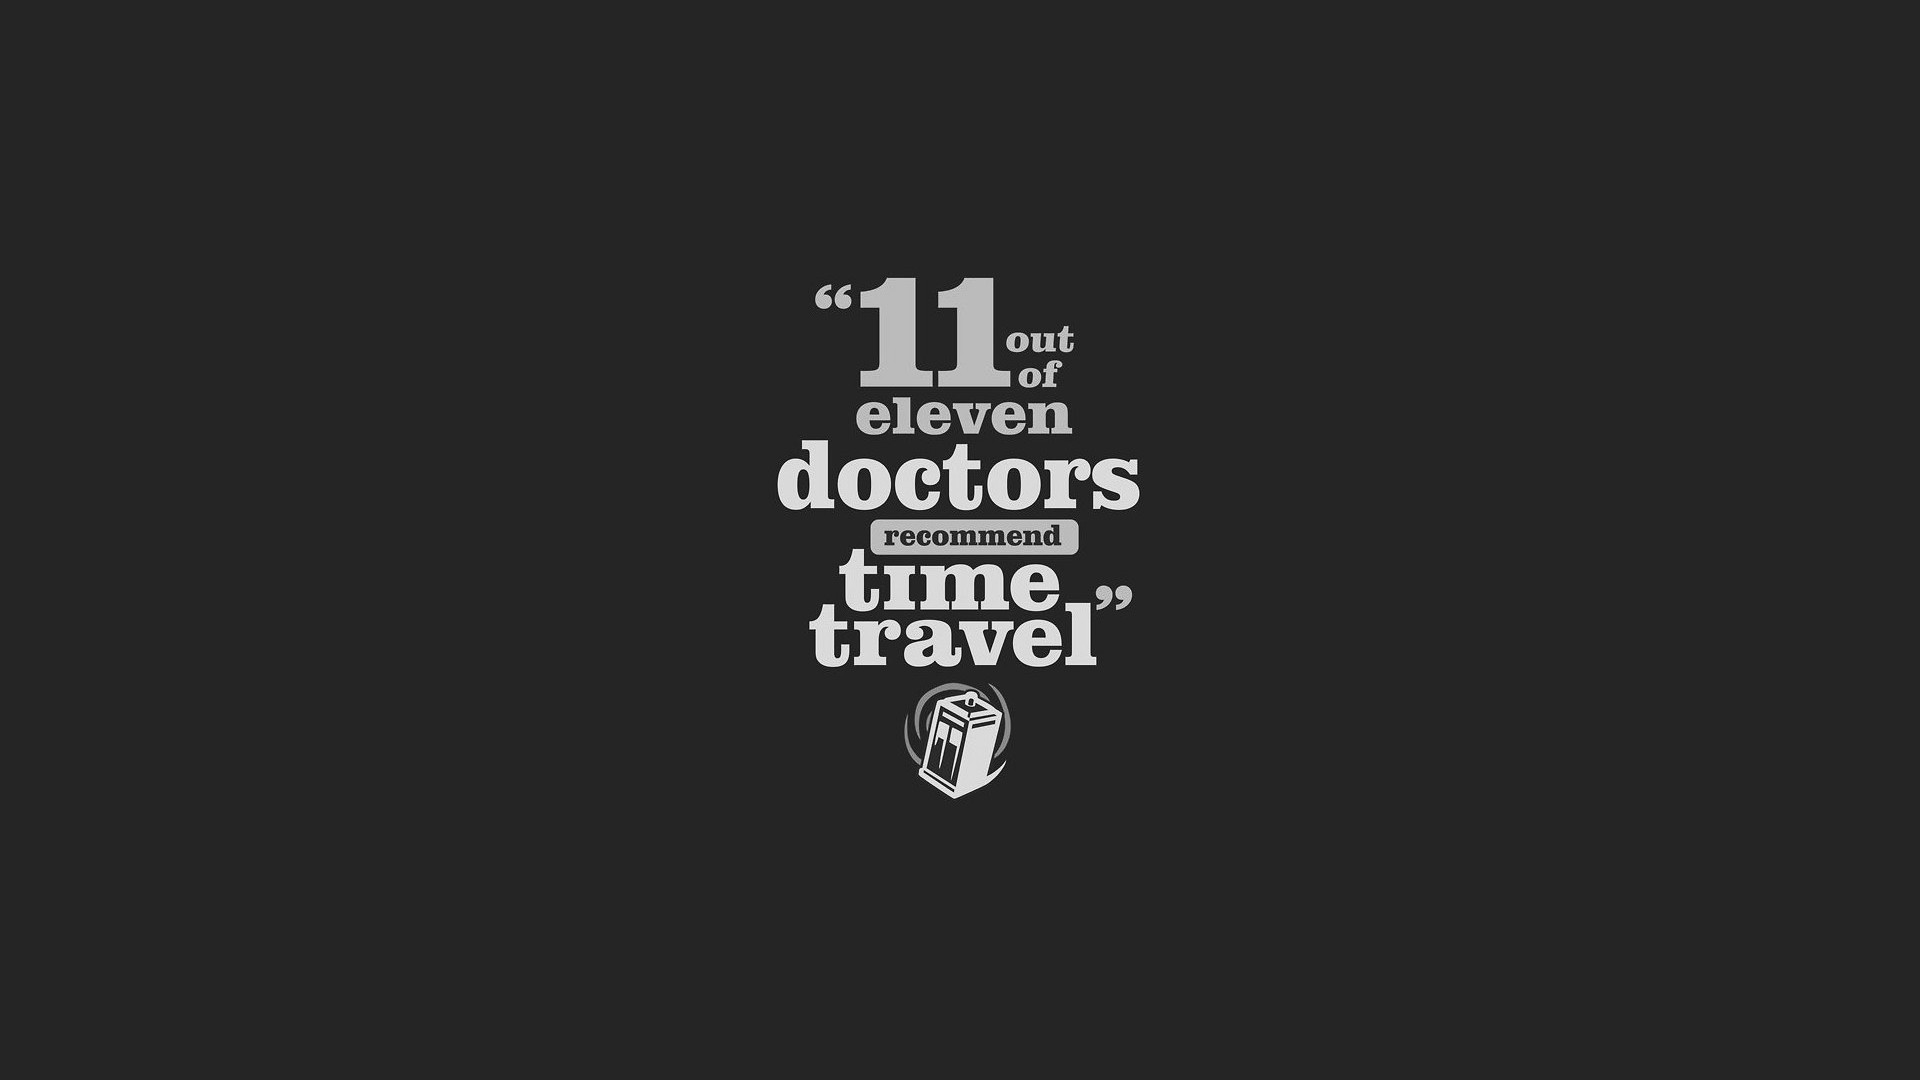 12890 Doctor Quotes Images Stock Photos  Vectors  Shutterstock